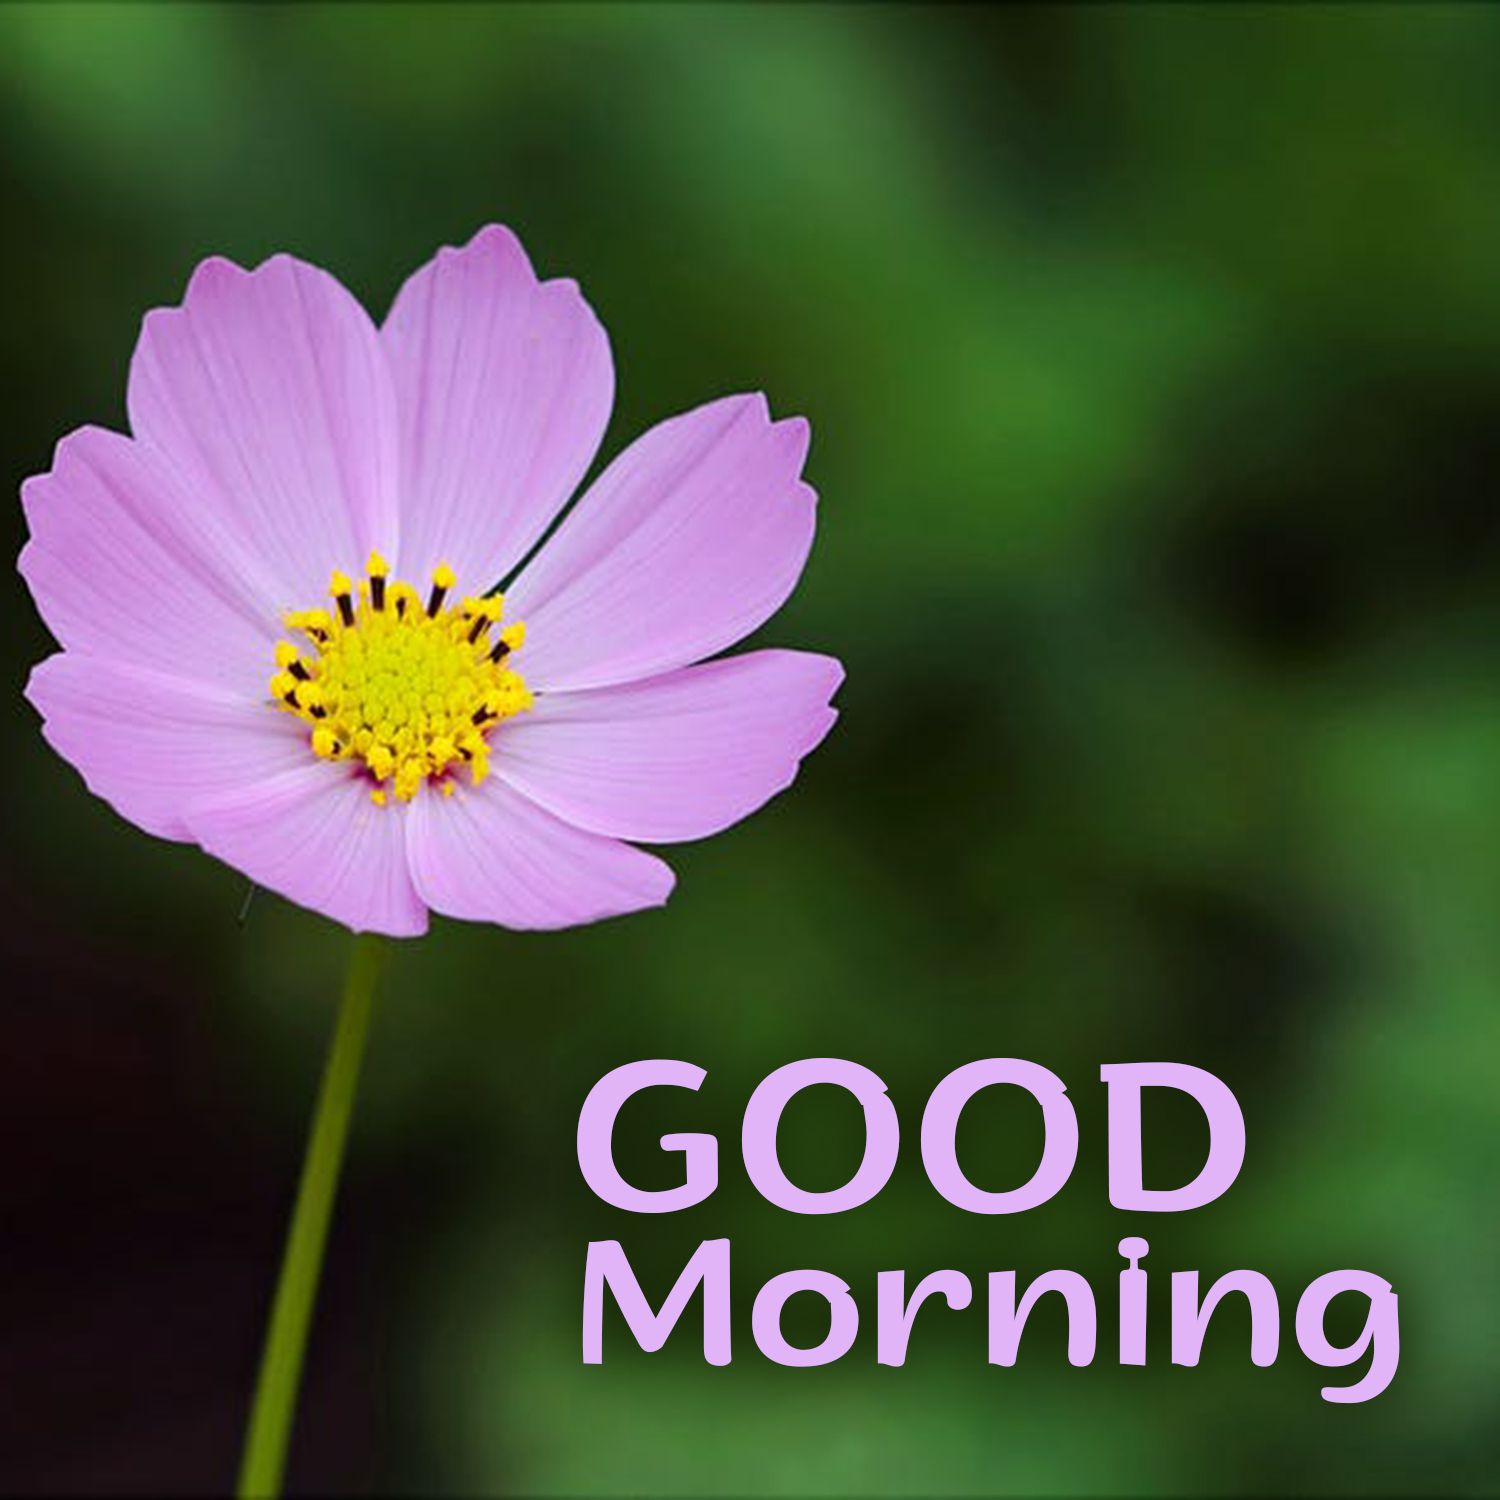 Brighten up the day of your friends with Good Morning flowers Images ...